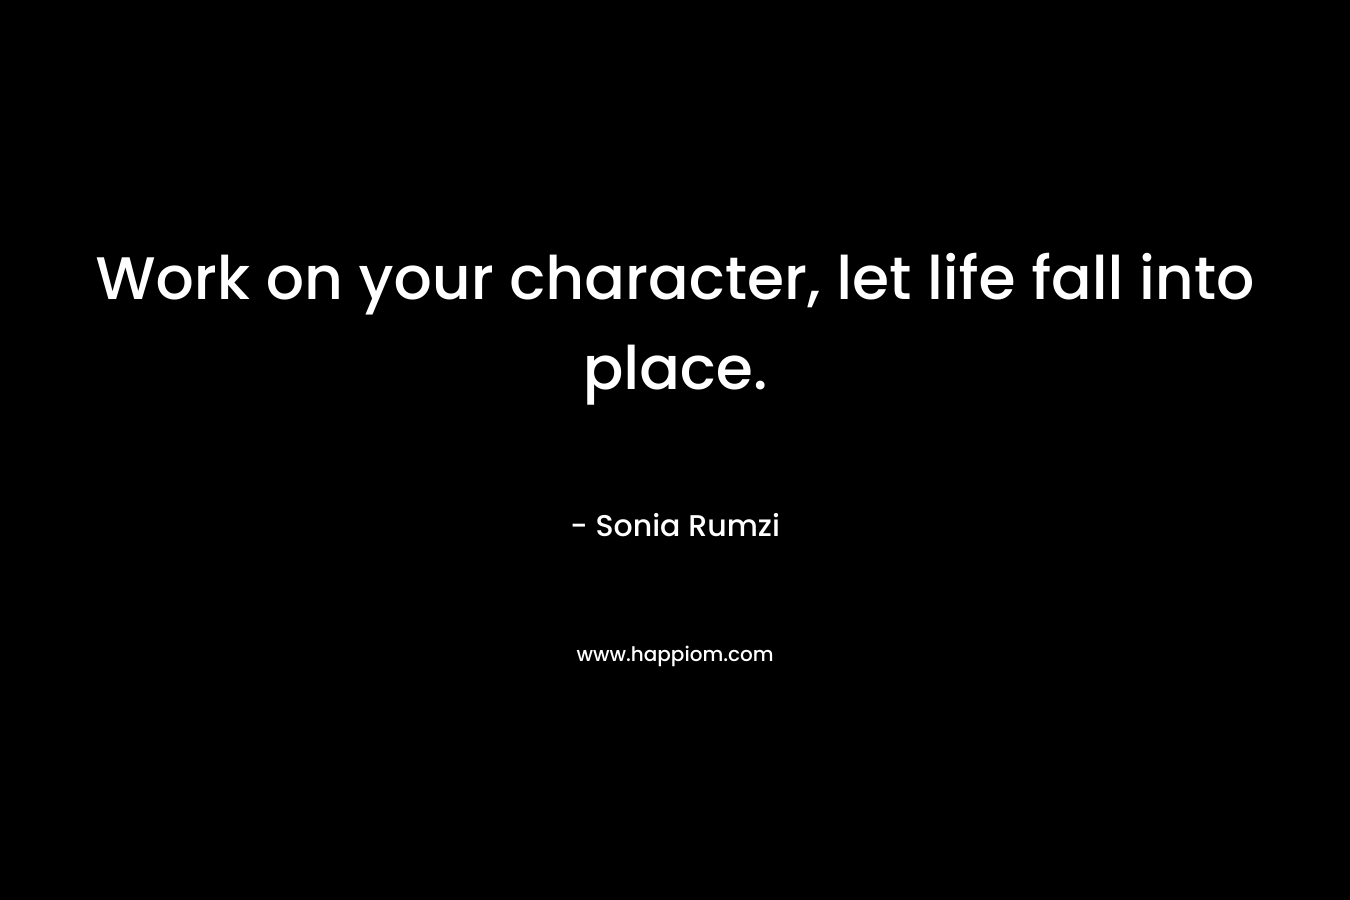 Work on your character, let life fall into place.